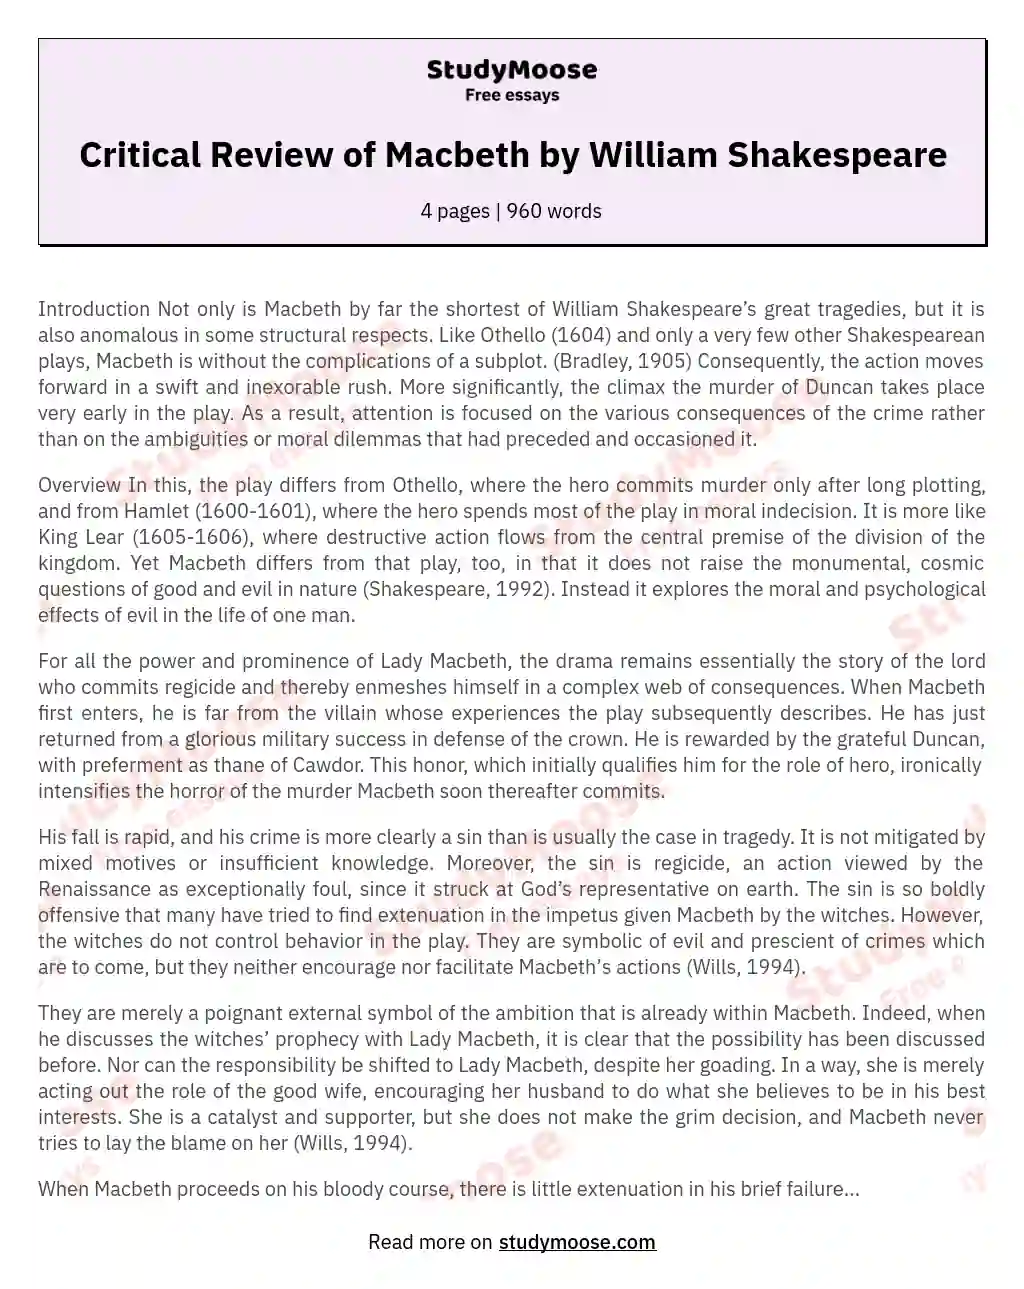 Critical Review of Macbeth by William Shakespeare essay